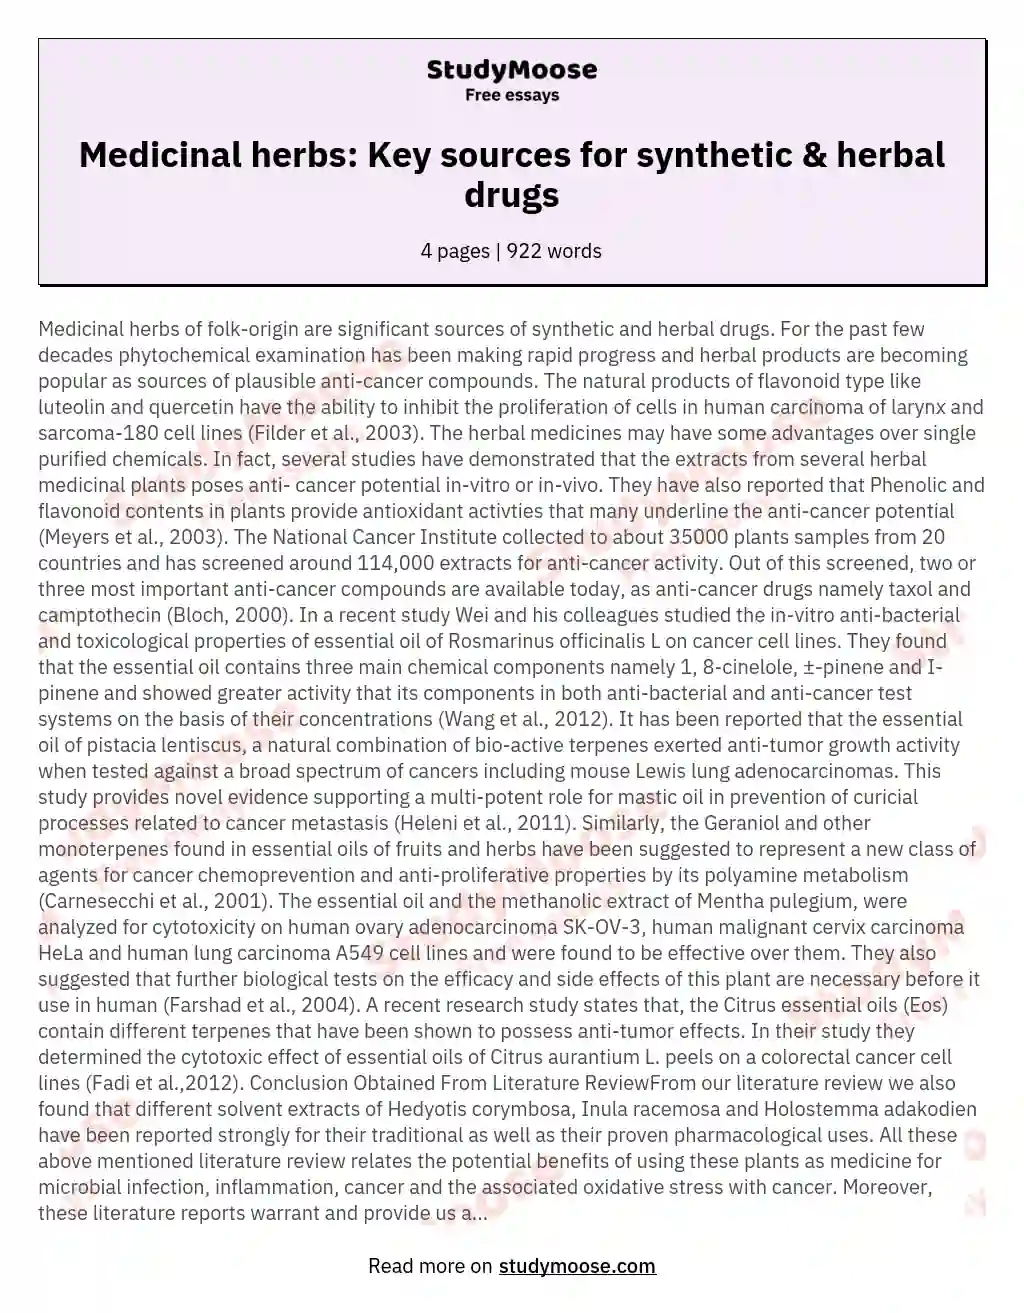 Medicinal herbs: Key sources for synthetic & herbal drugs essay